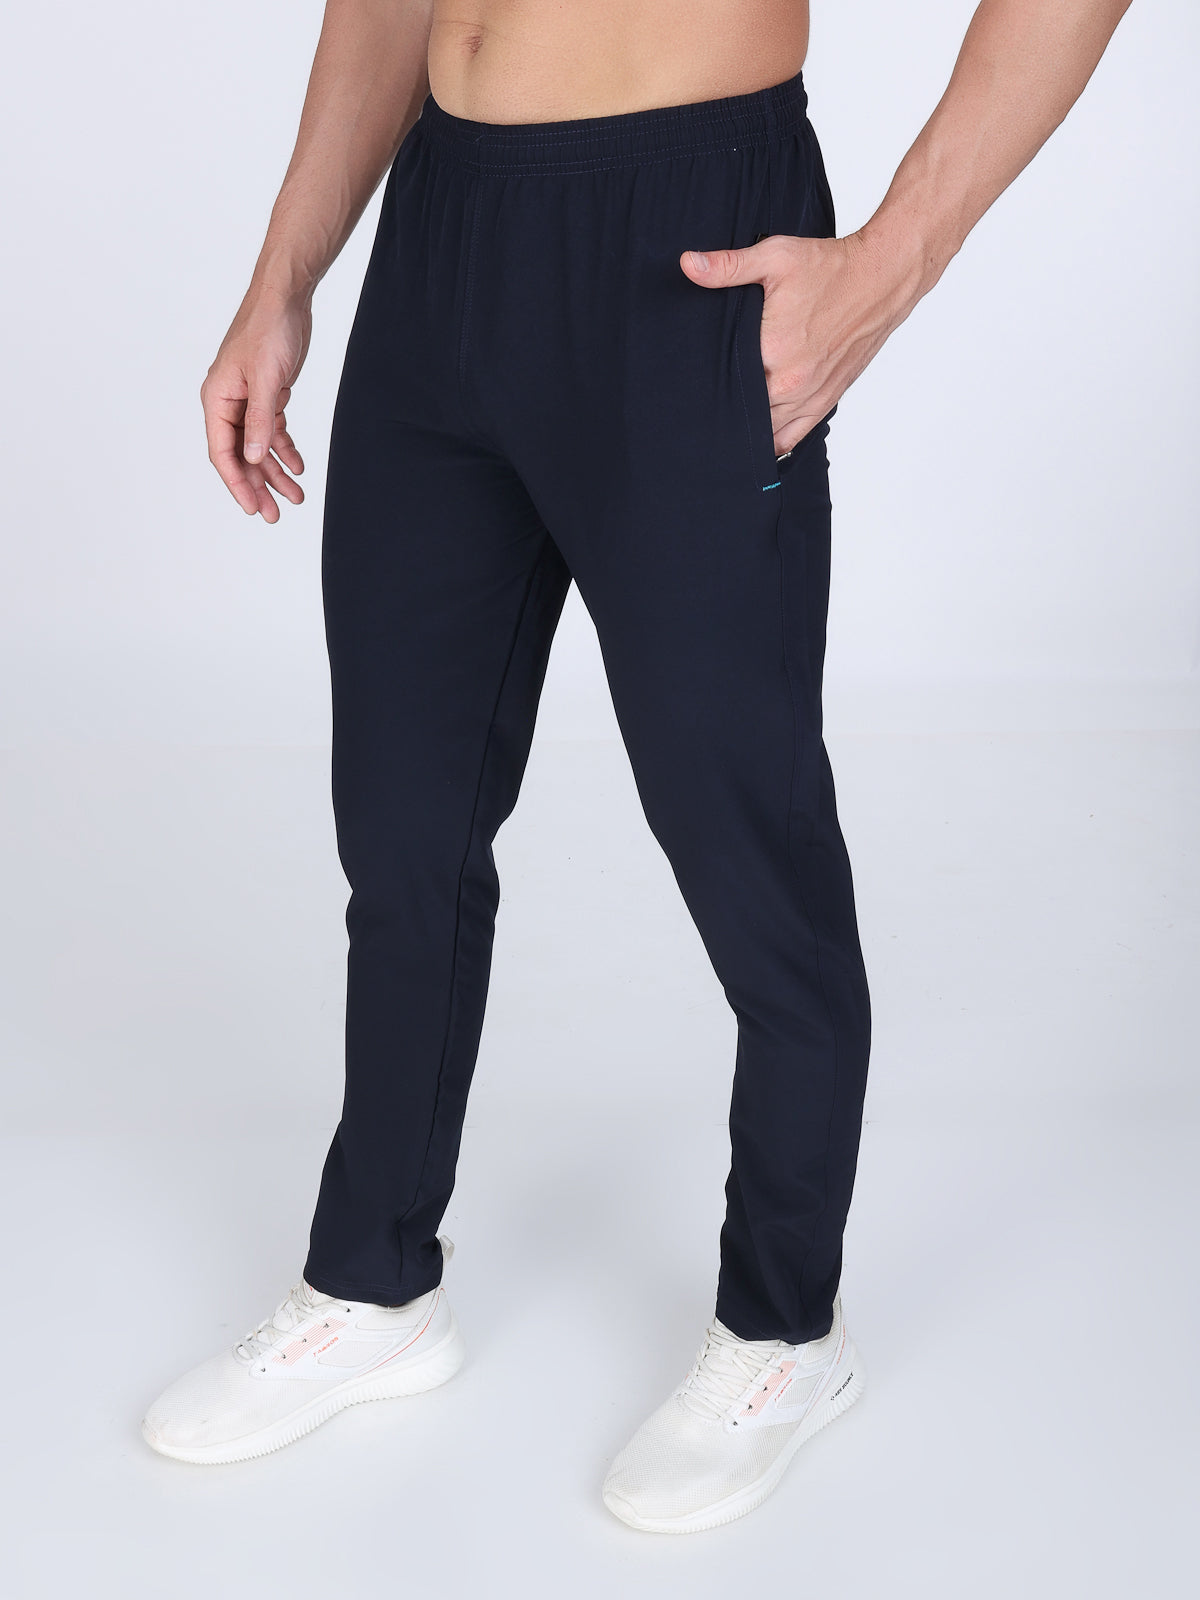 Combo Of Men's Black And Dark Blue Twill Lycra Stretch Track Pants